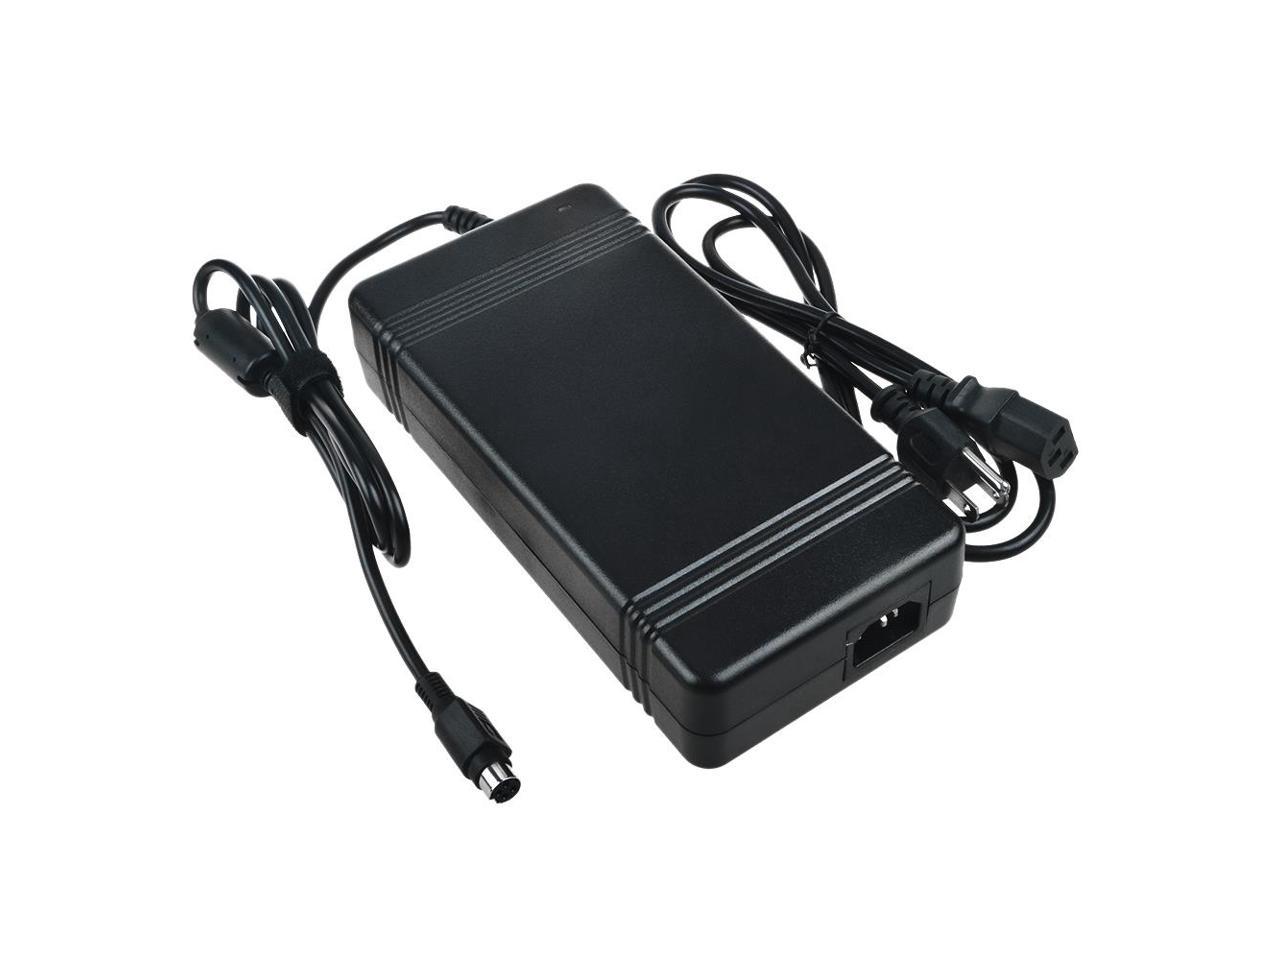 AC Adapter For Clevo P170 P170HM P170HM3 P170HM-3DE M980NU Power Supply Charger 